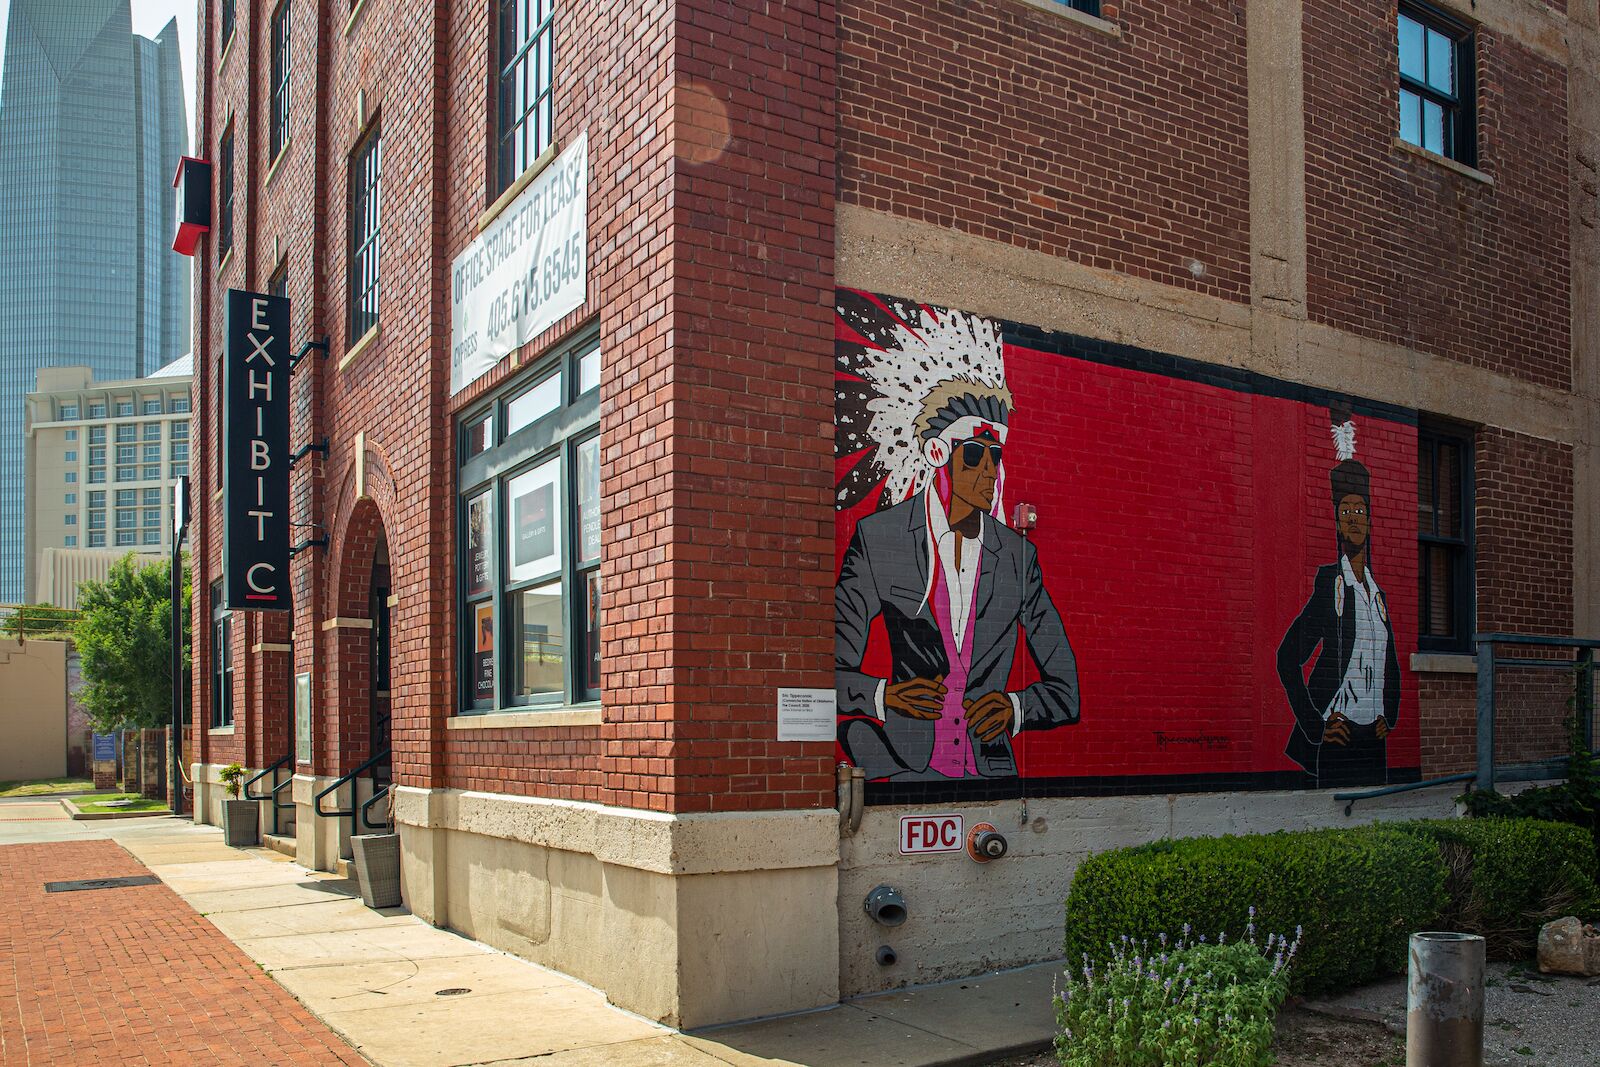 exterior of Exhibit C in Bricktown with mural on the brick wall, museums in Oklahoma City